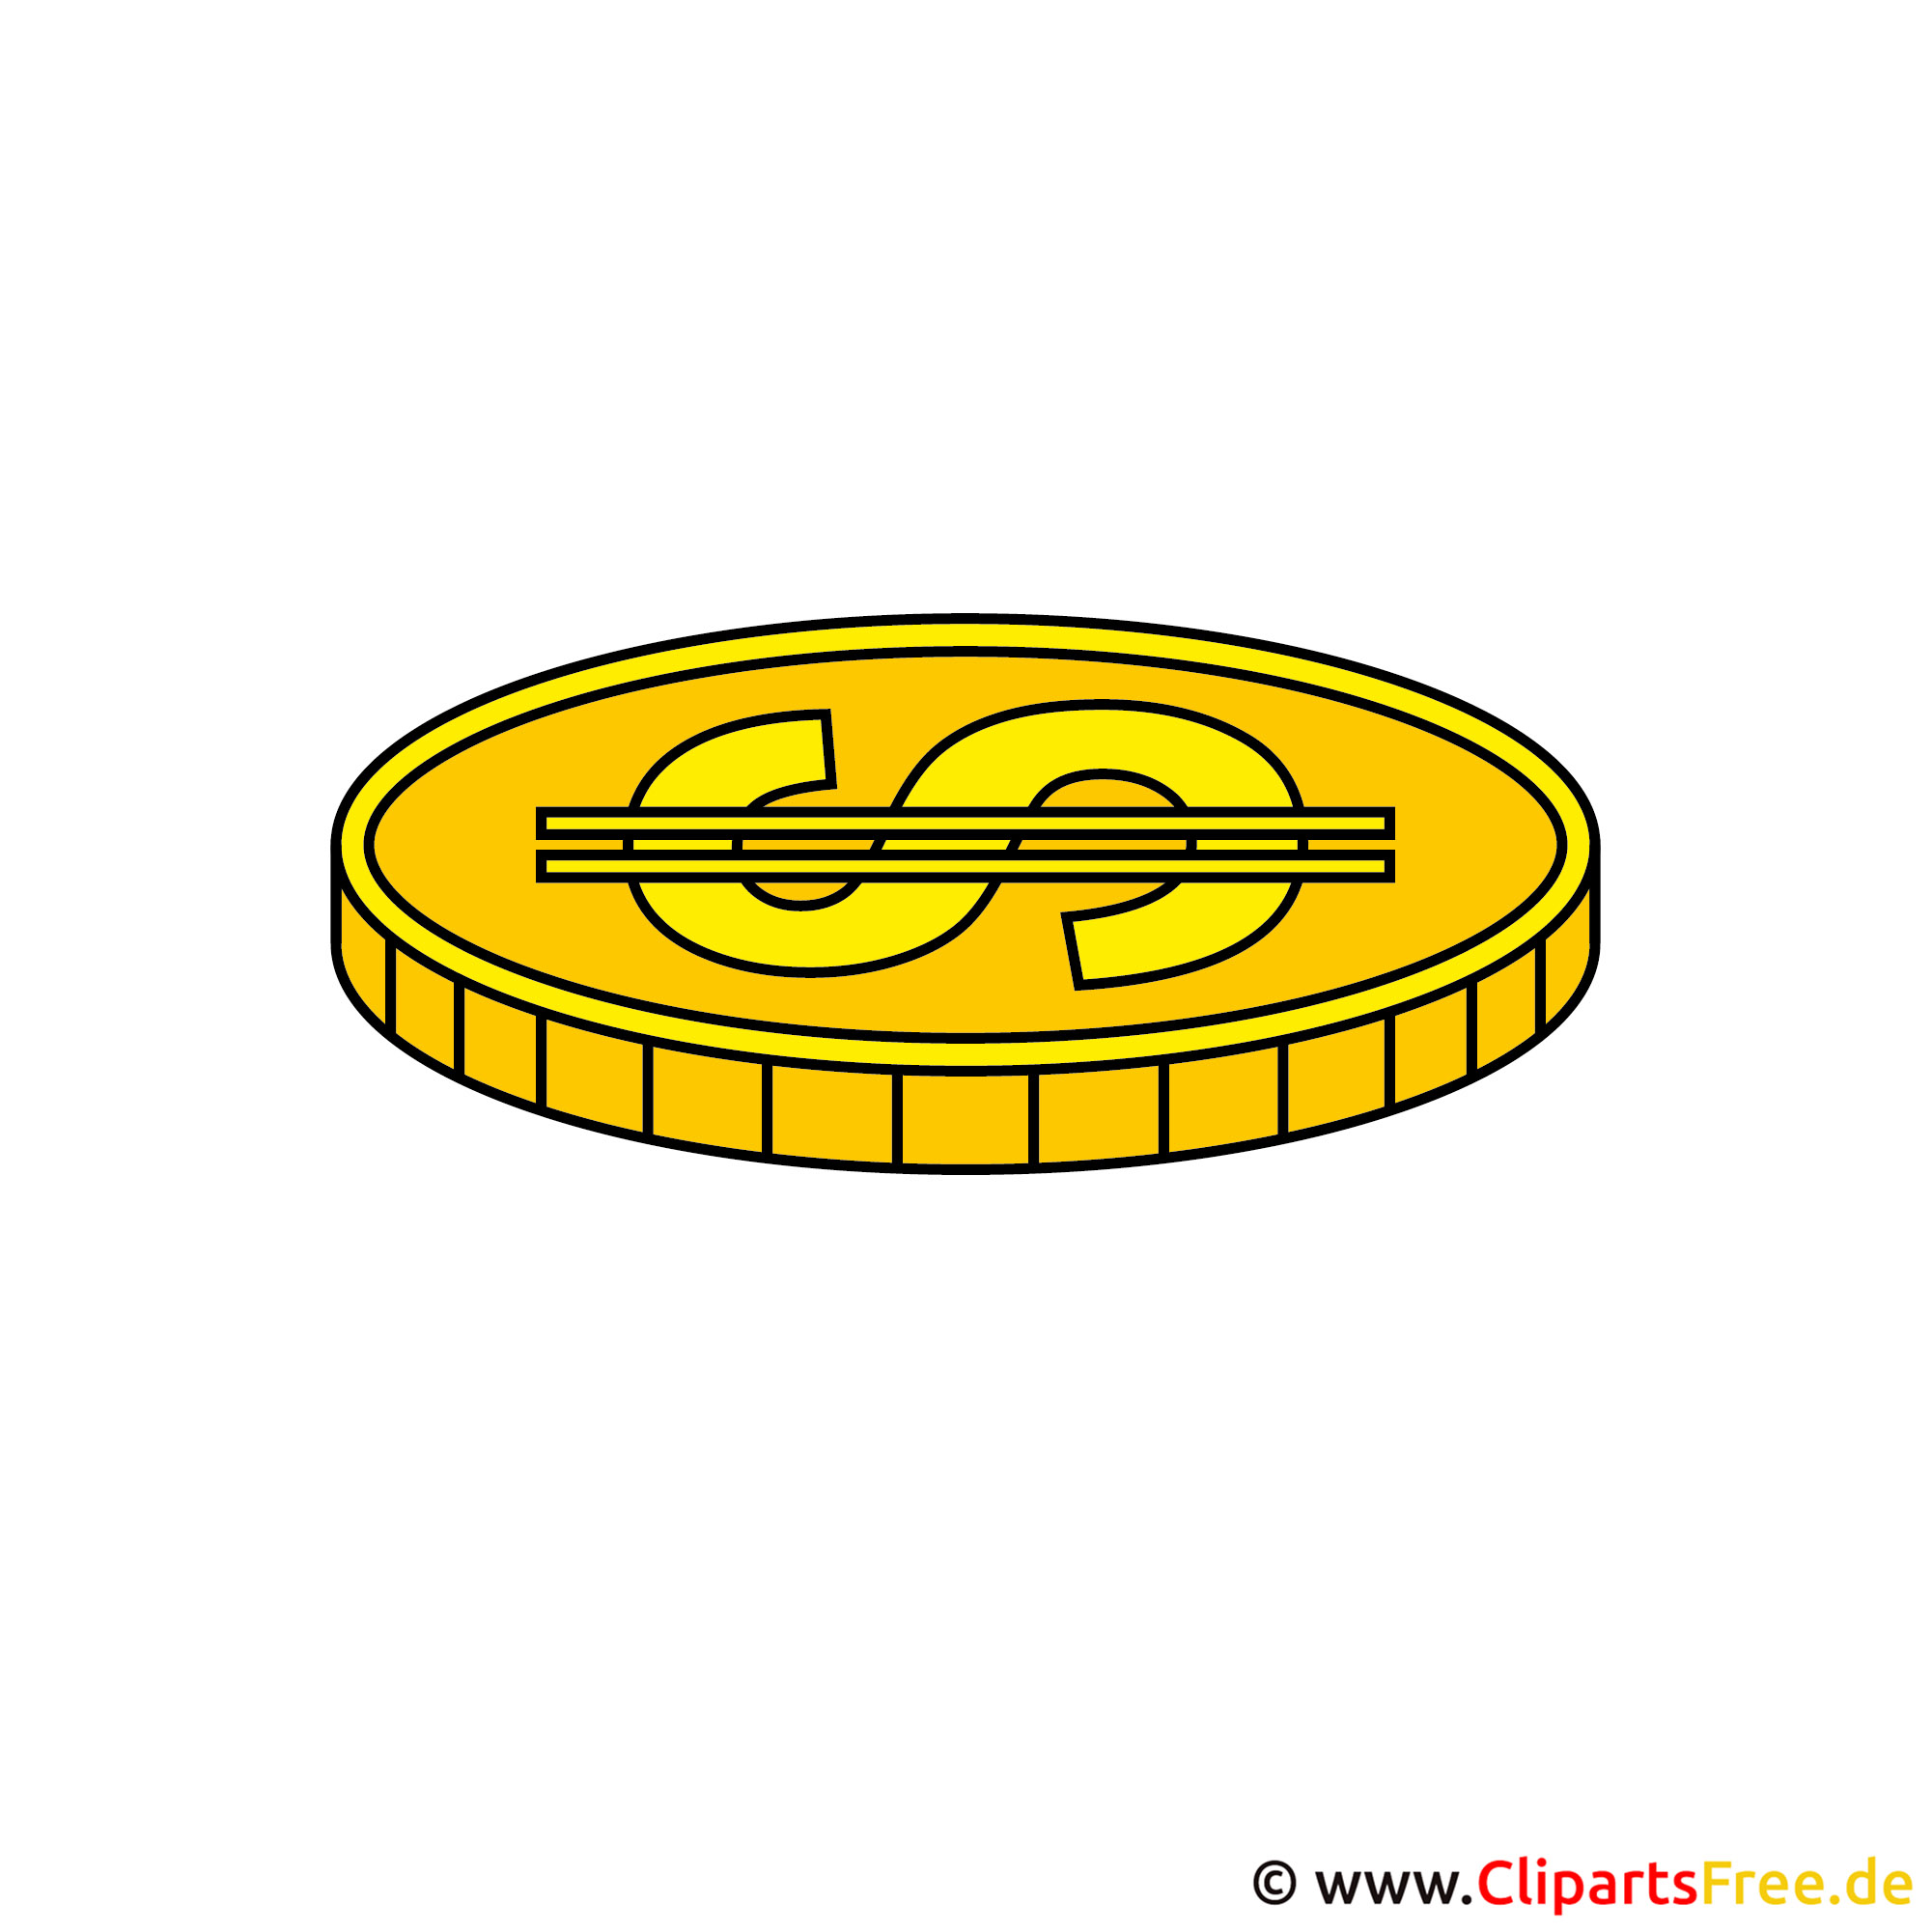 xmind clipart - photo #20